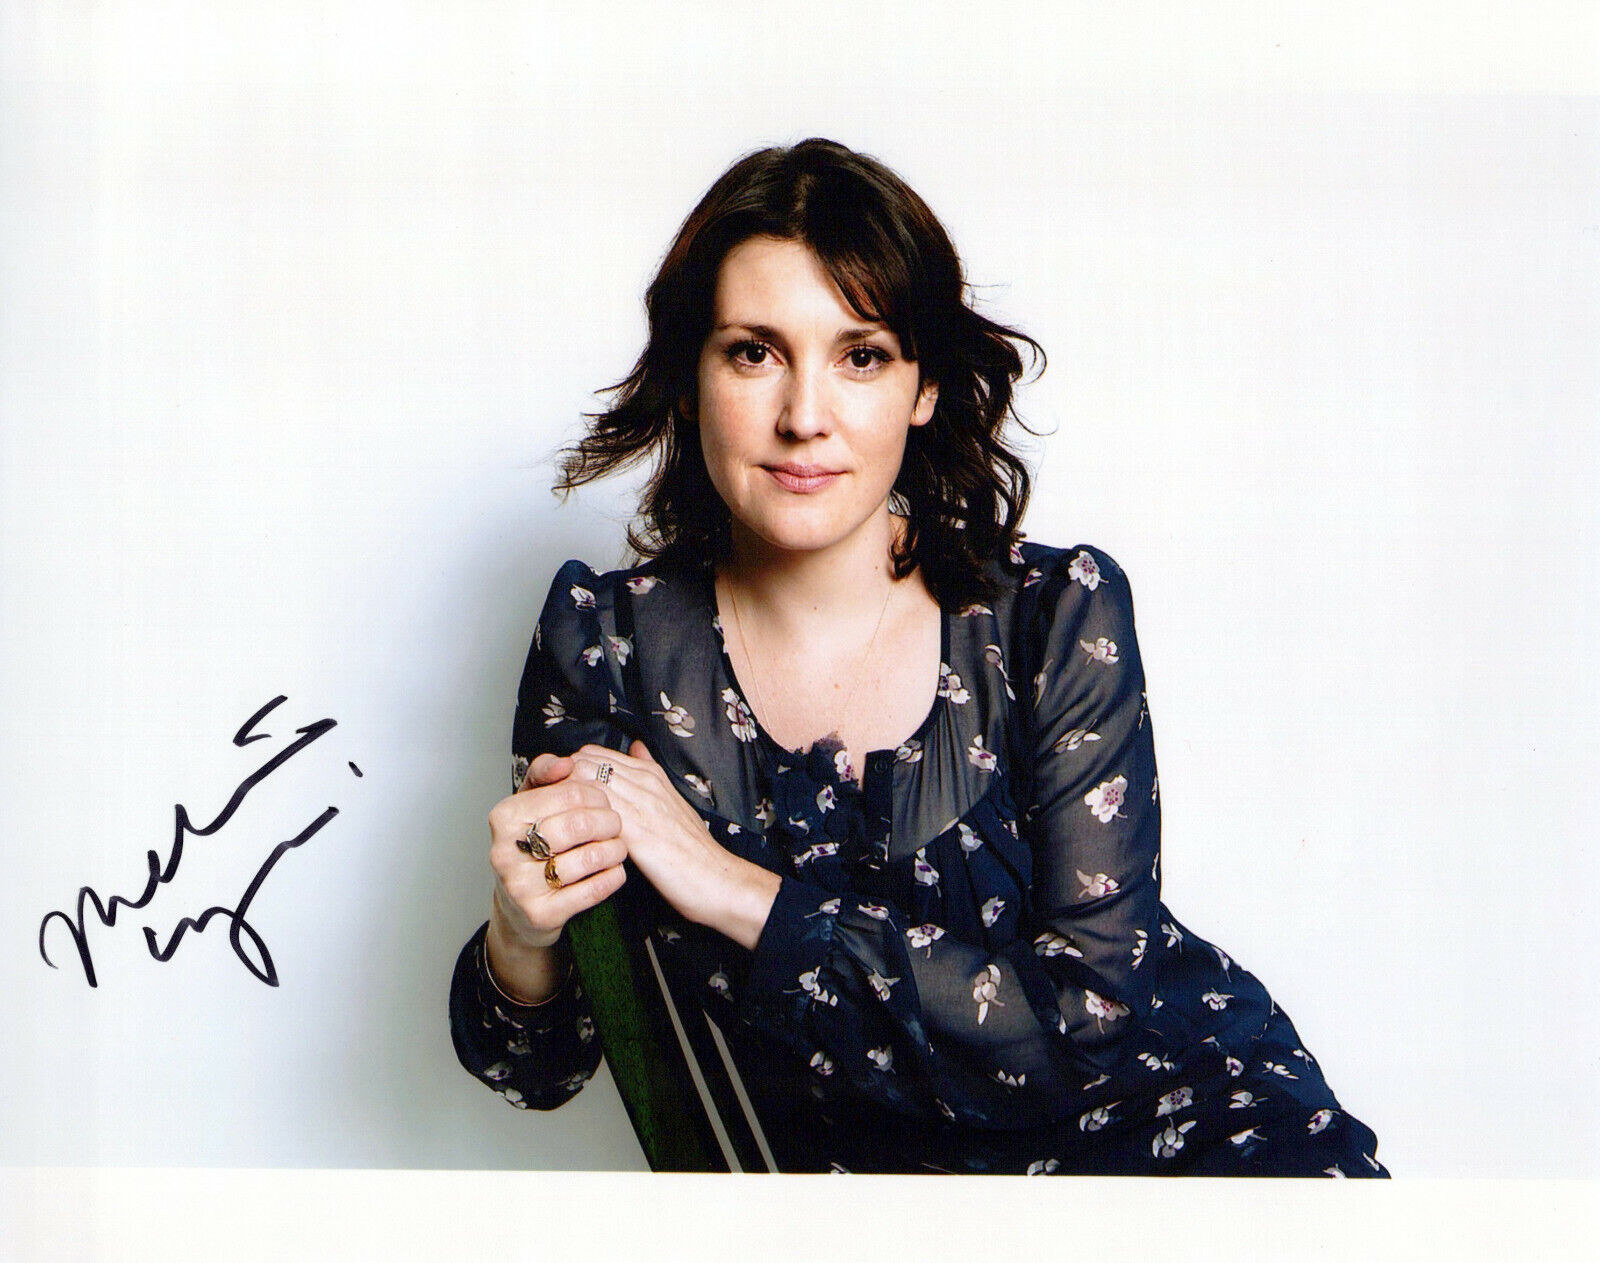 Melanie Lynskey glamour shot autographed Photo Poster painting signed 8x10 #1